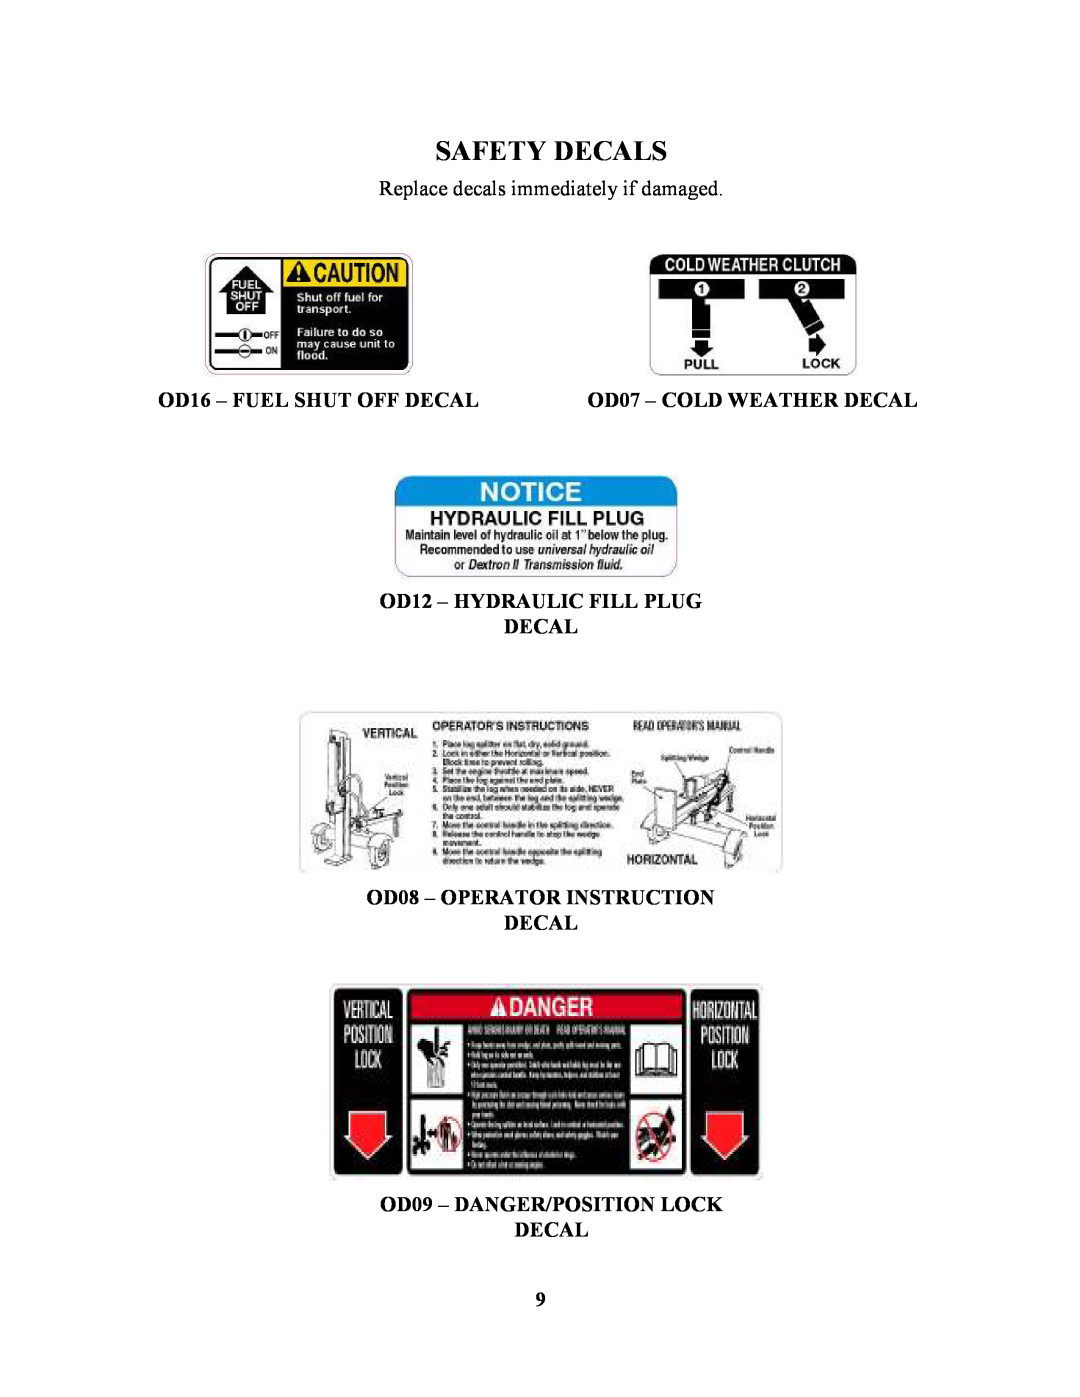 Swisher LS5527S owner manual Safety Decals, Replace decals immediately if damaged, OD16 - FUEL SHUT OFF DECAL 